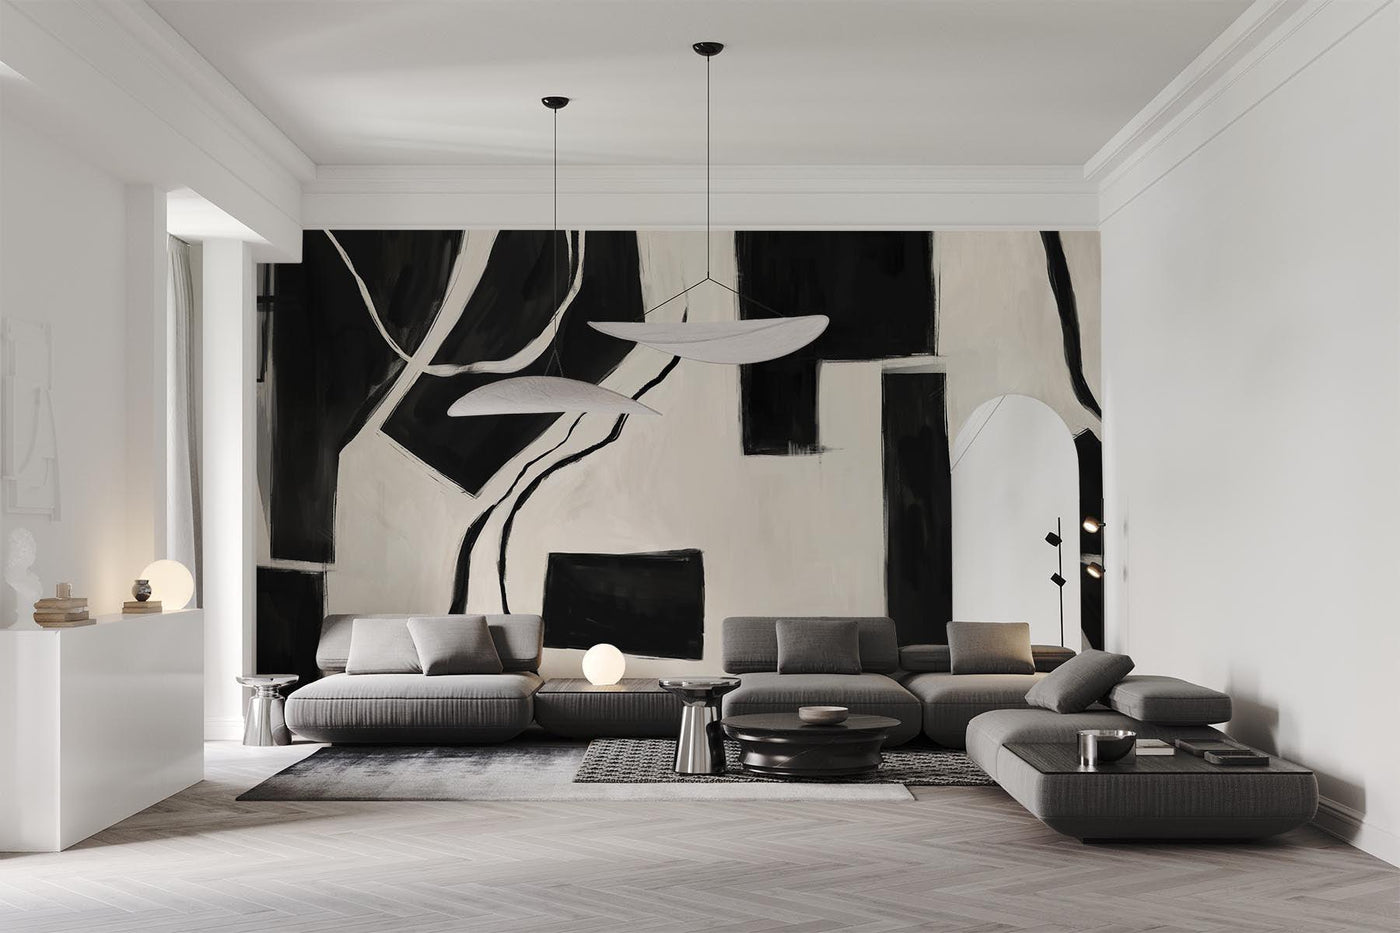 Black and white wall murals for a modern interior. Modern wallpapers in black and white for a contemporary interior. Artistic, graphic or wall art for a minimalistic, maximalistic or any bold interior update